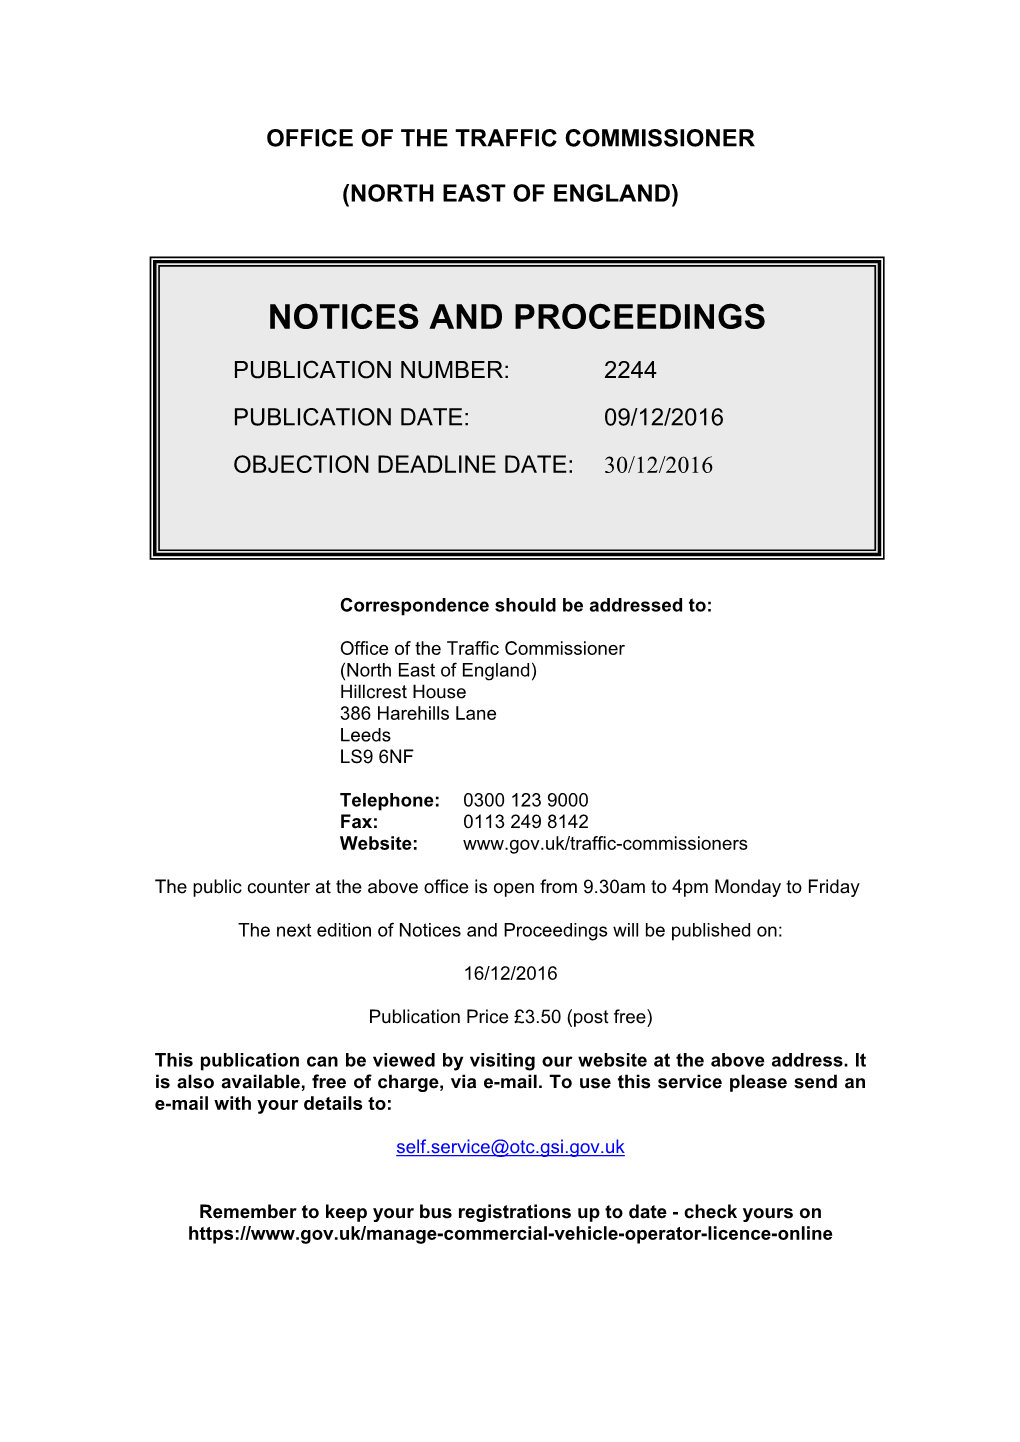 Notices and Proceedings: North East of England: 9 December 2016